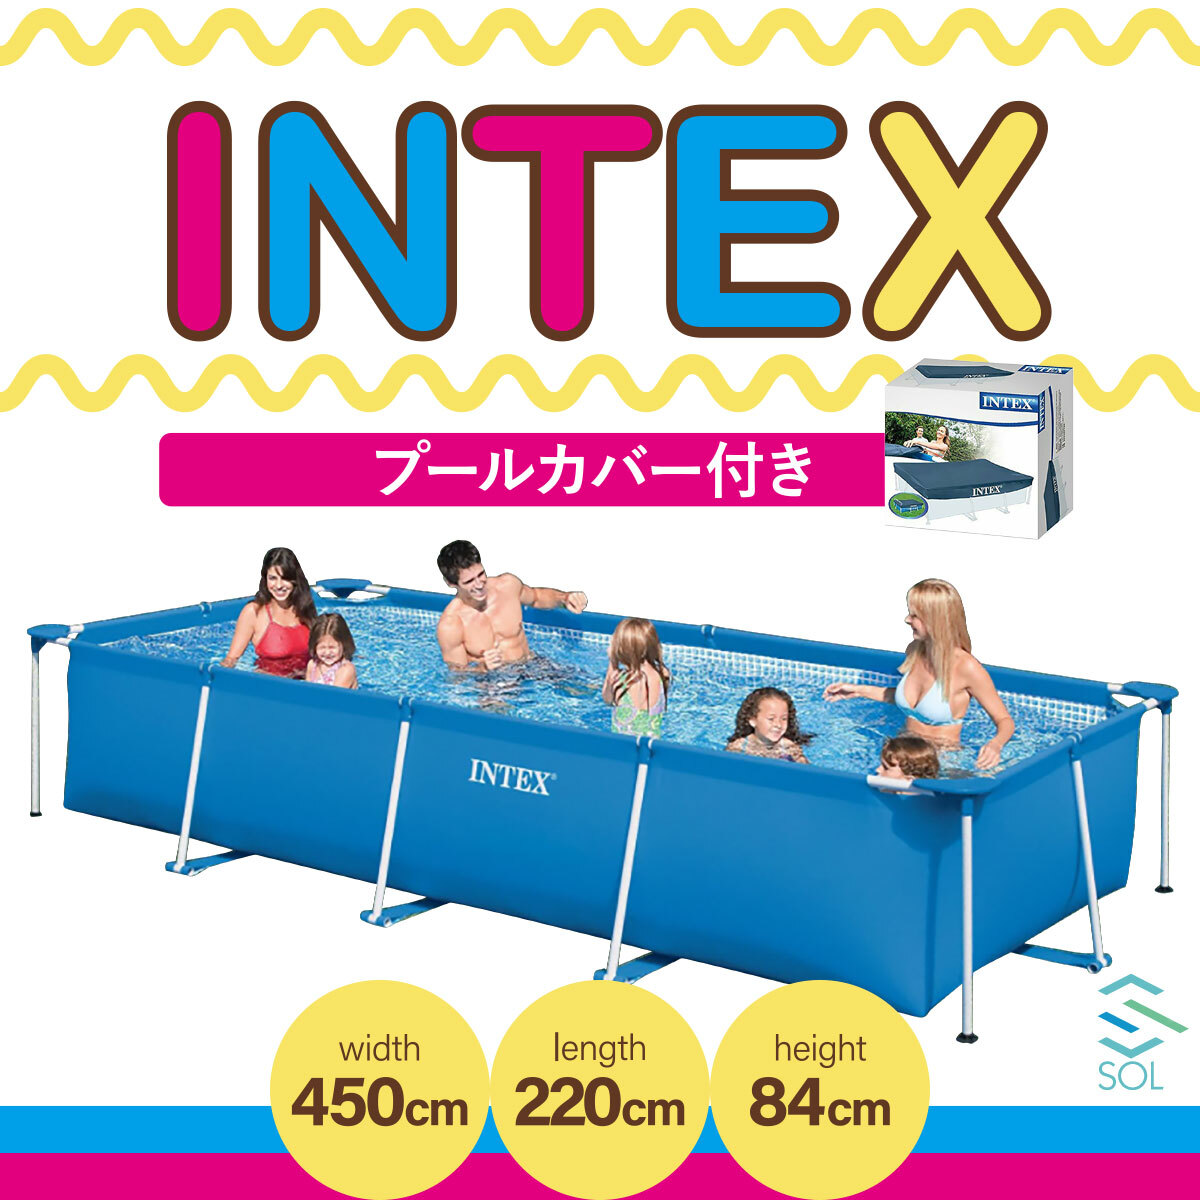  double extra-large home use pool exclusive use with cover INTEX Inte ks regular goods rek tang la frame 450cmX220cmX84cm shipping deadline 18 hour 